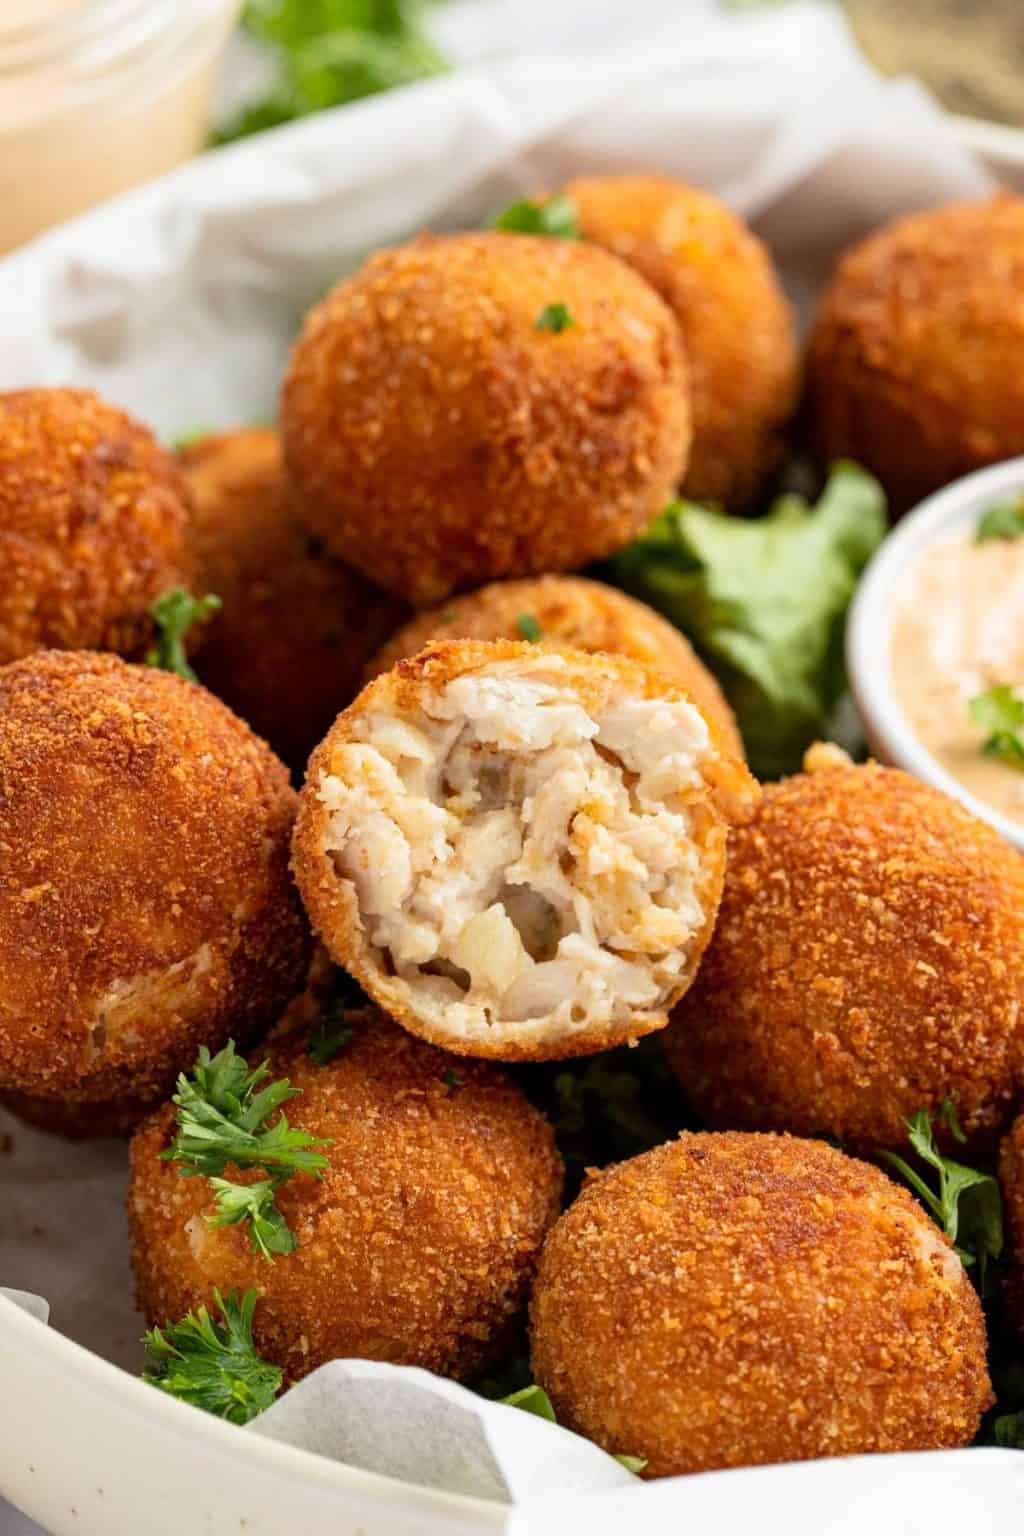 Chicken Croquettes - Immaculate Bites